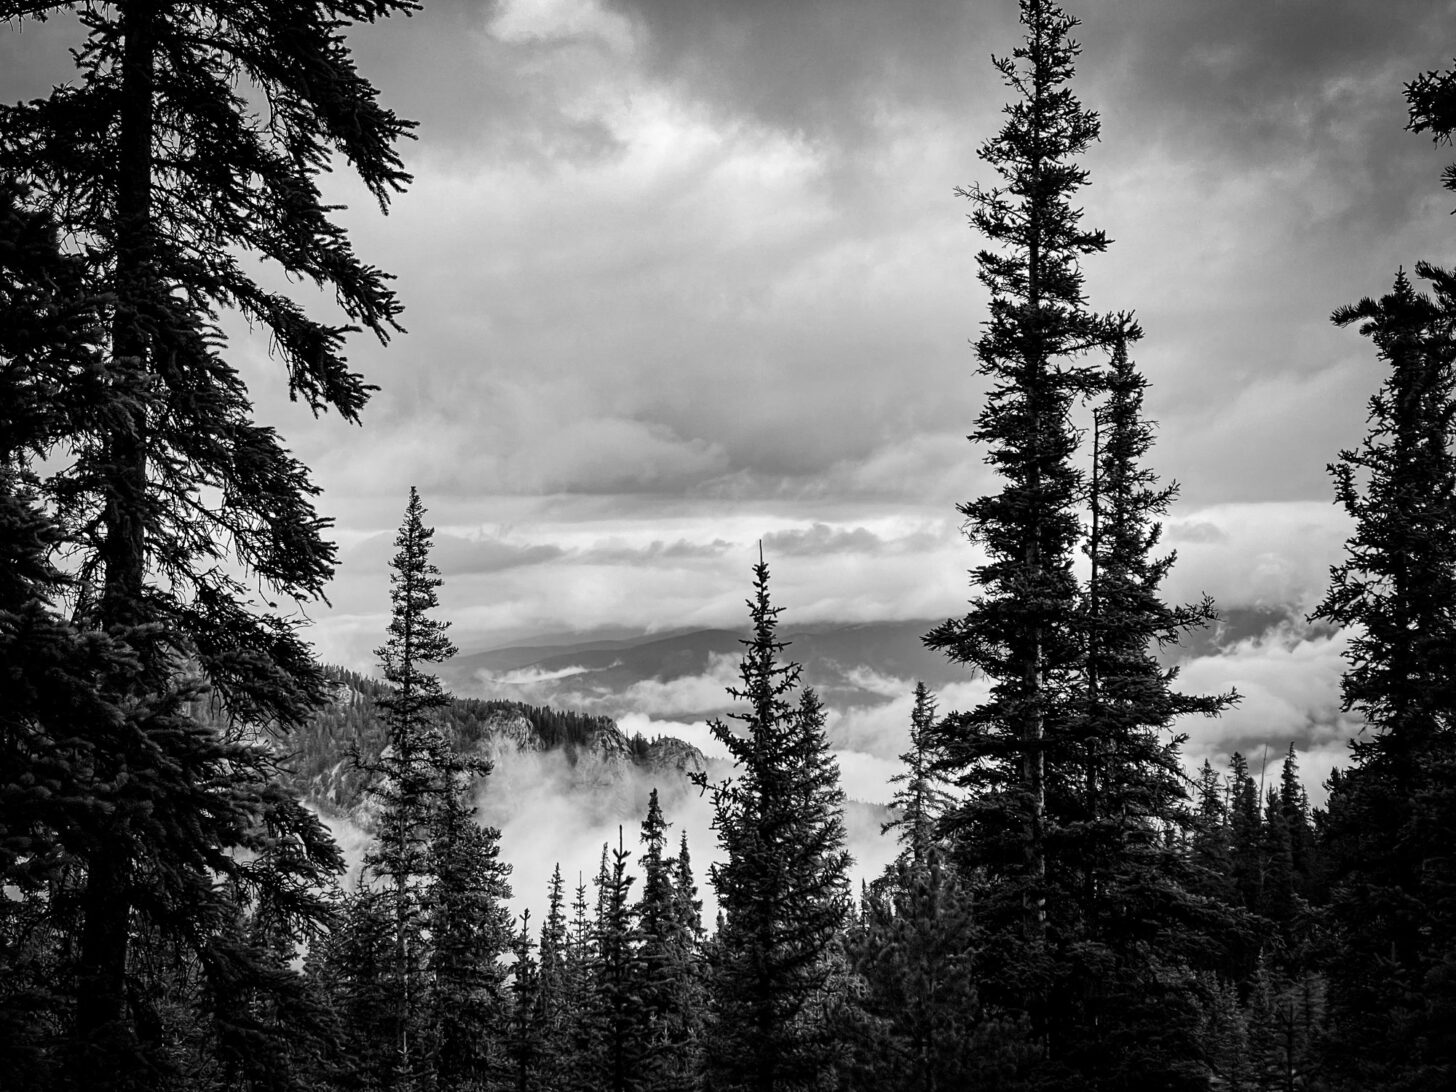 a landscape photograph with trees and clouds prominent